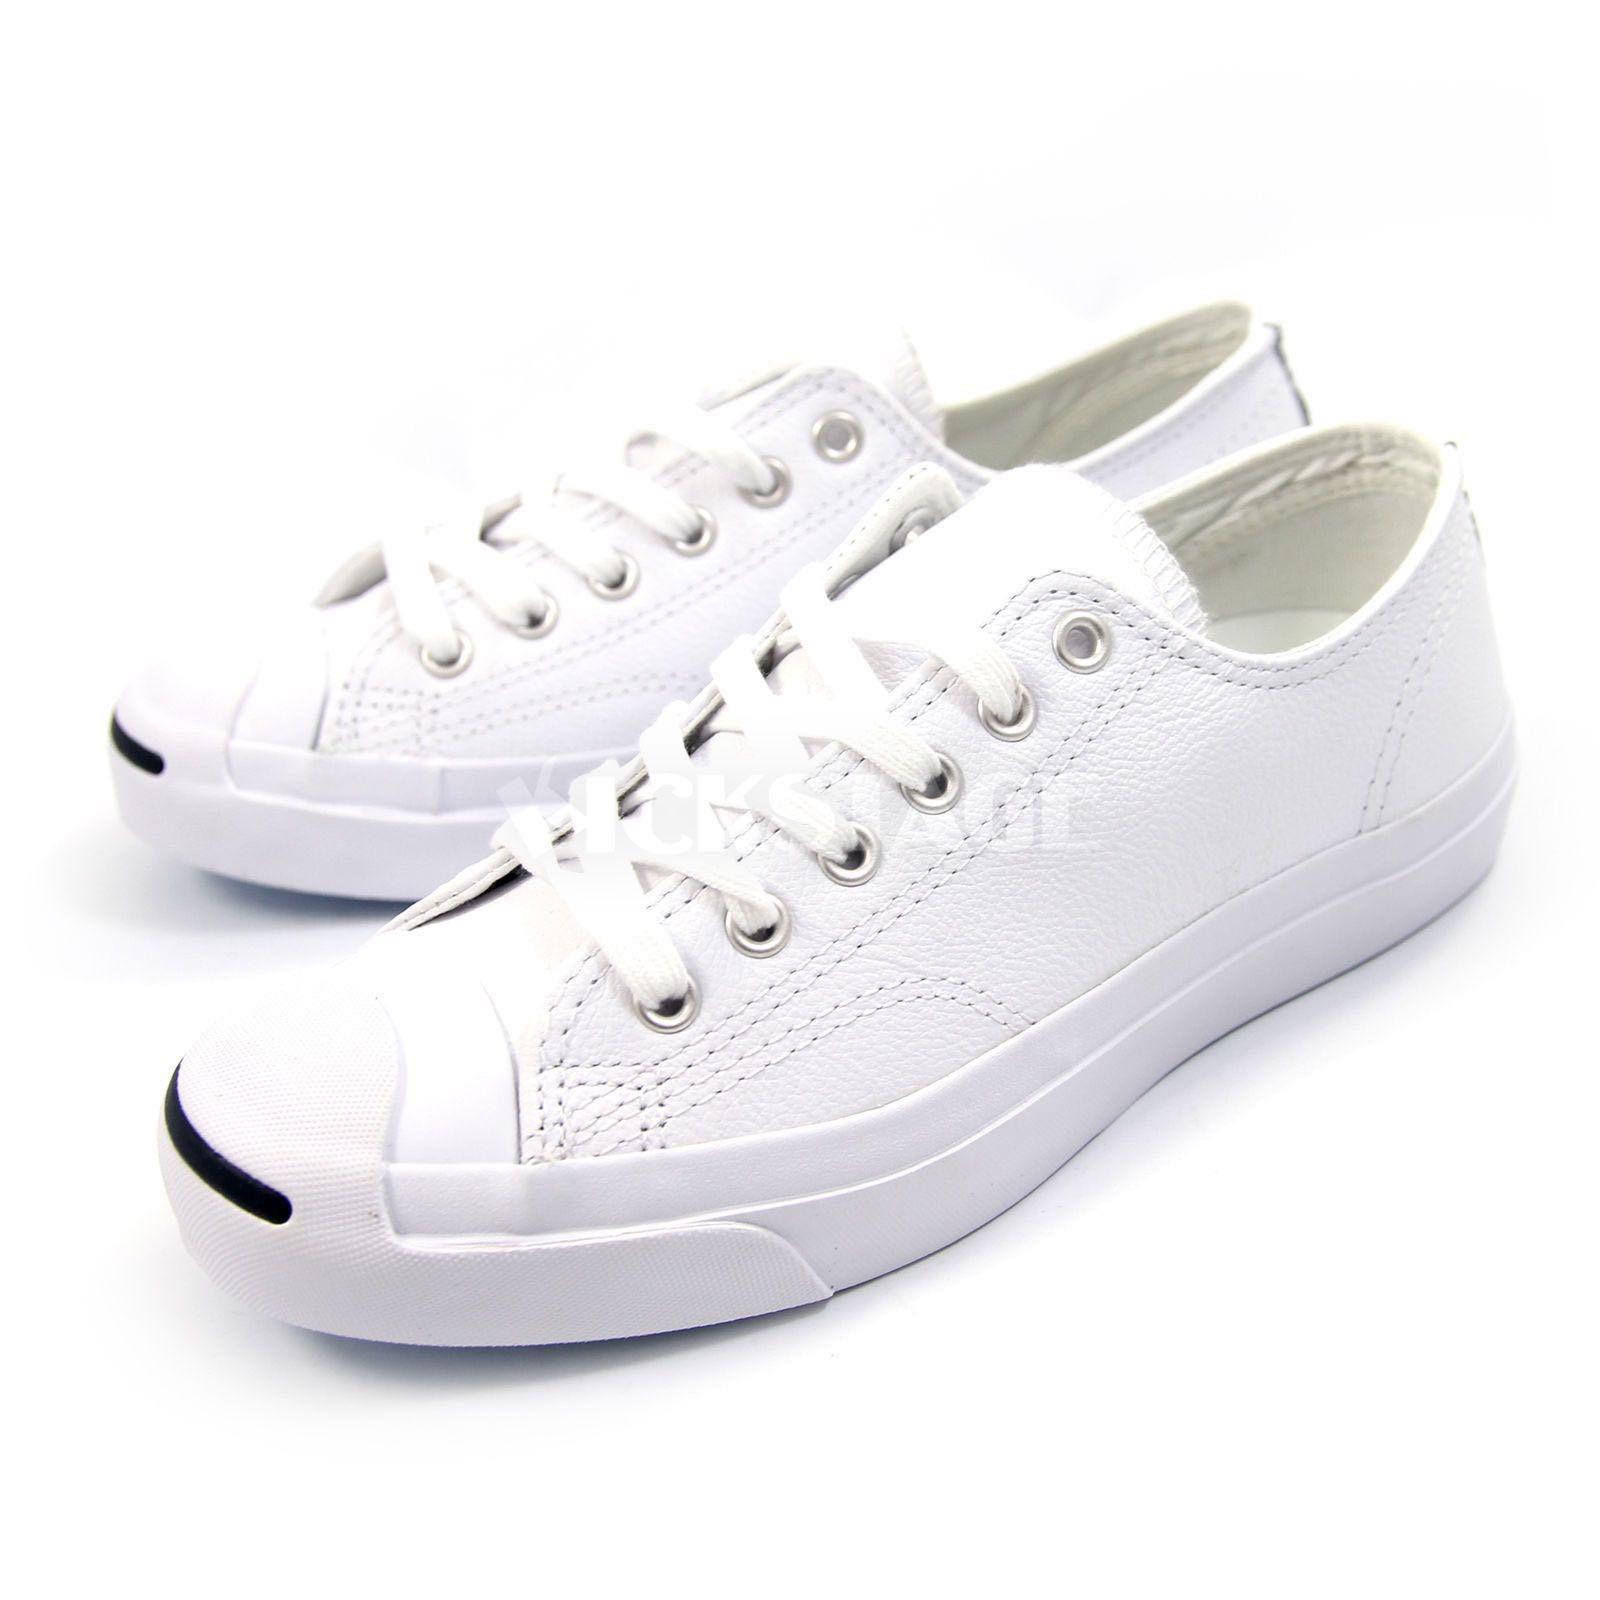 Authentic jack Purcell converse white sneakers, real leather, Women's  Fashion, Footwear, Sneakers on Carousell